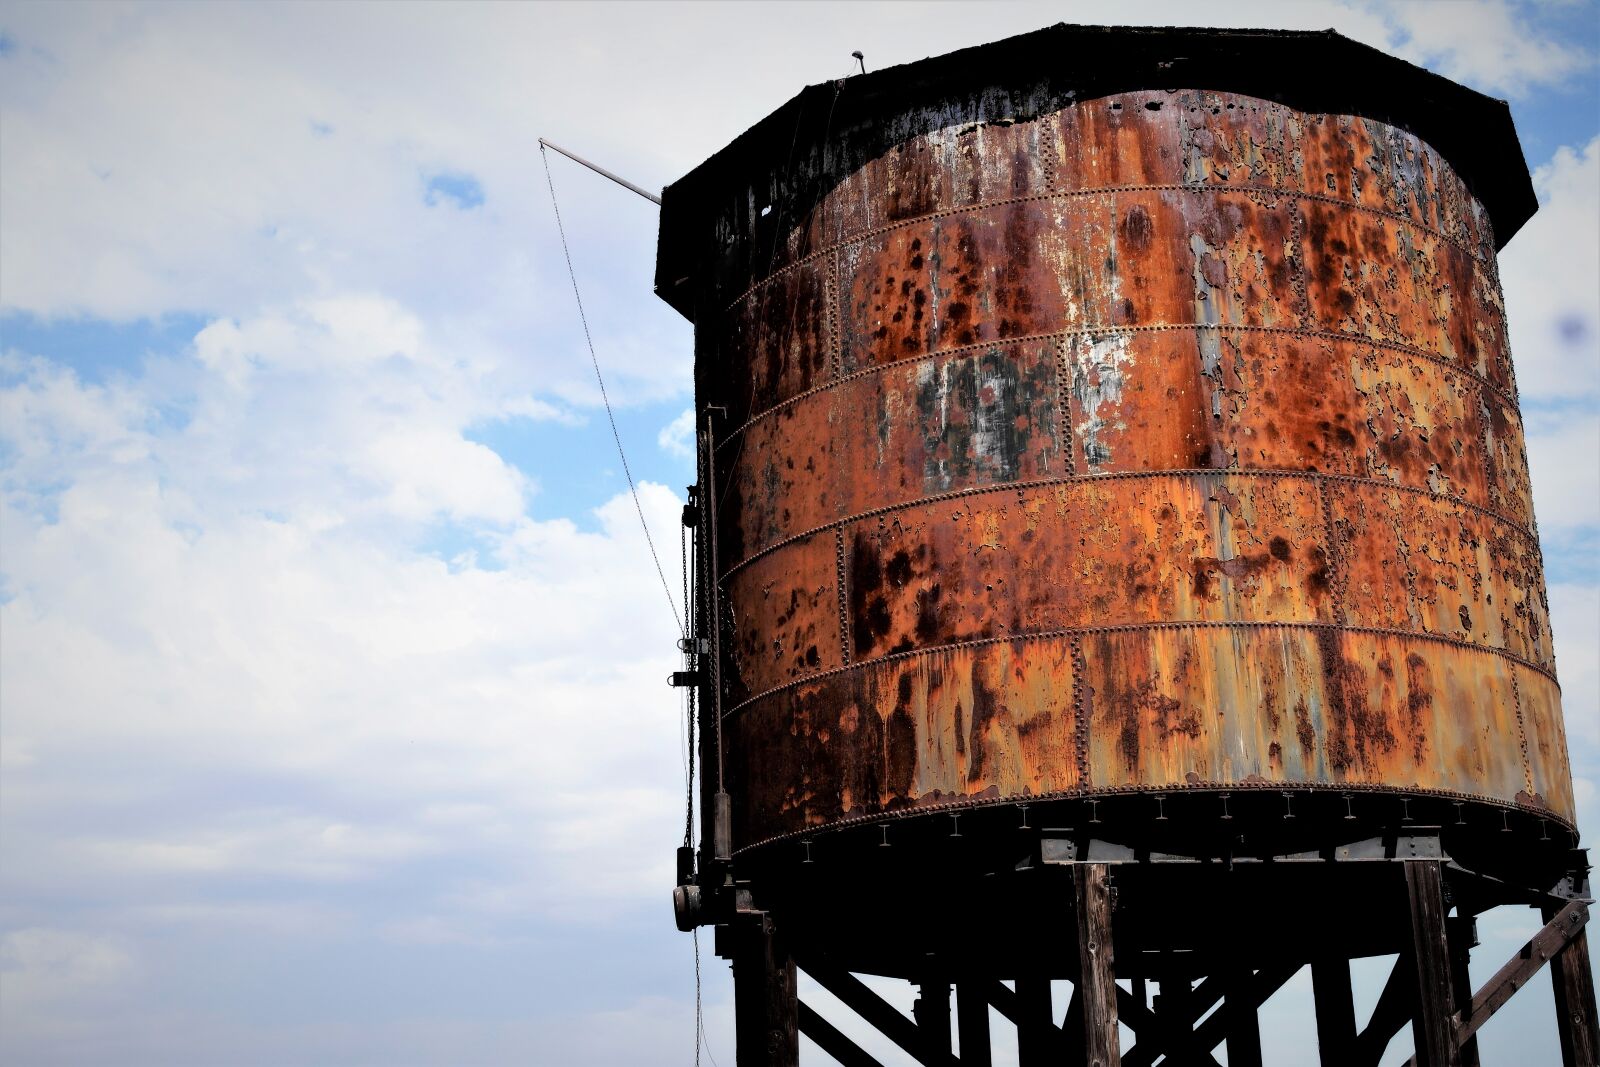 Samsung NX1000 sample photo. Industrial, rust, rustic, water photography